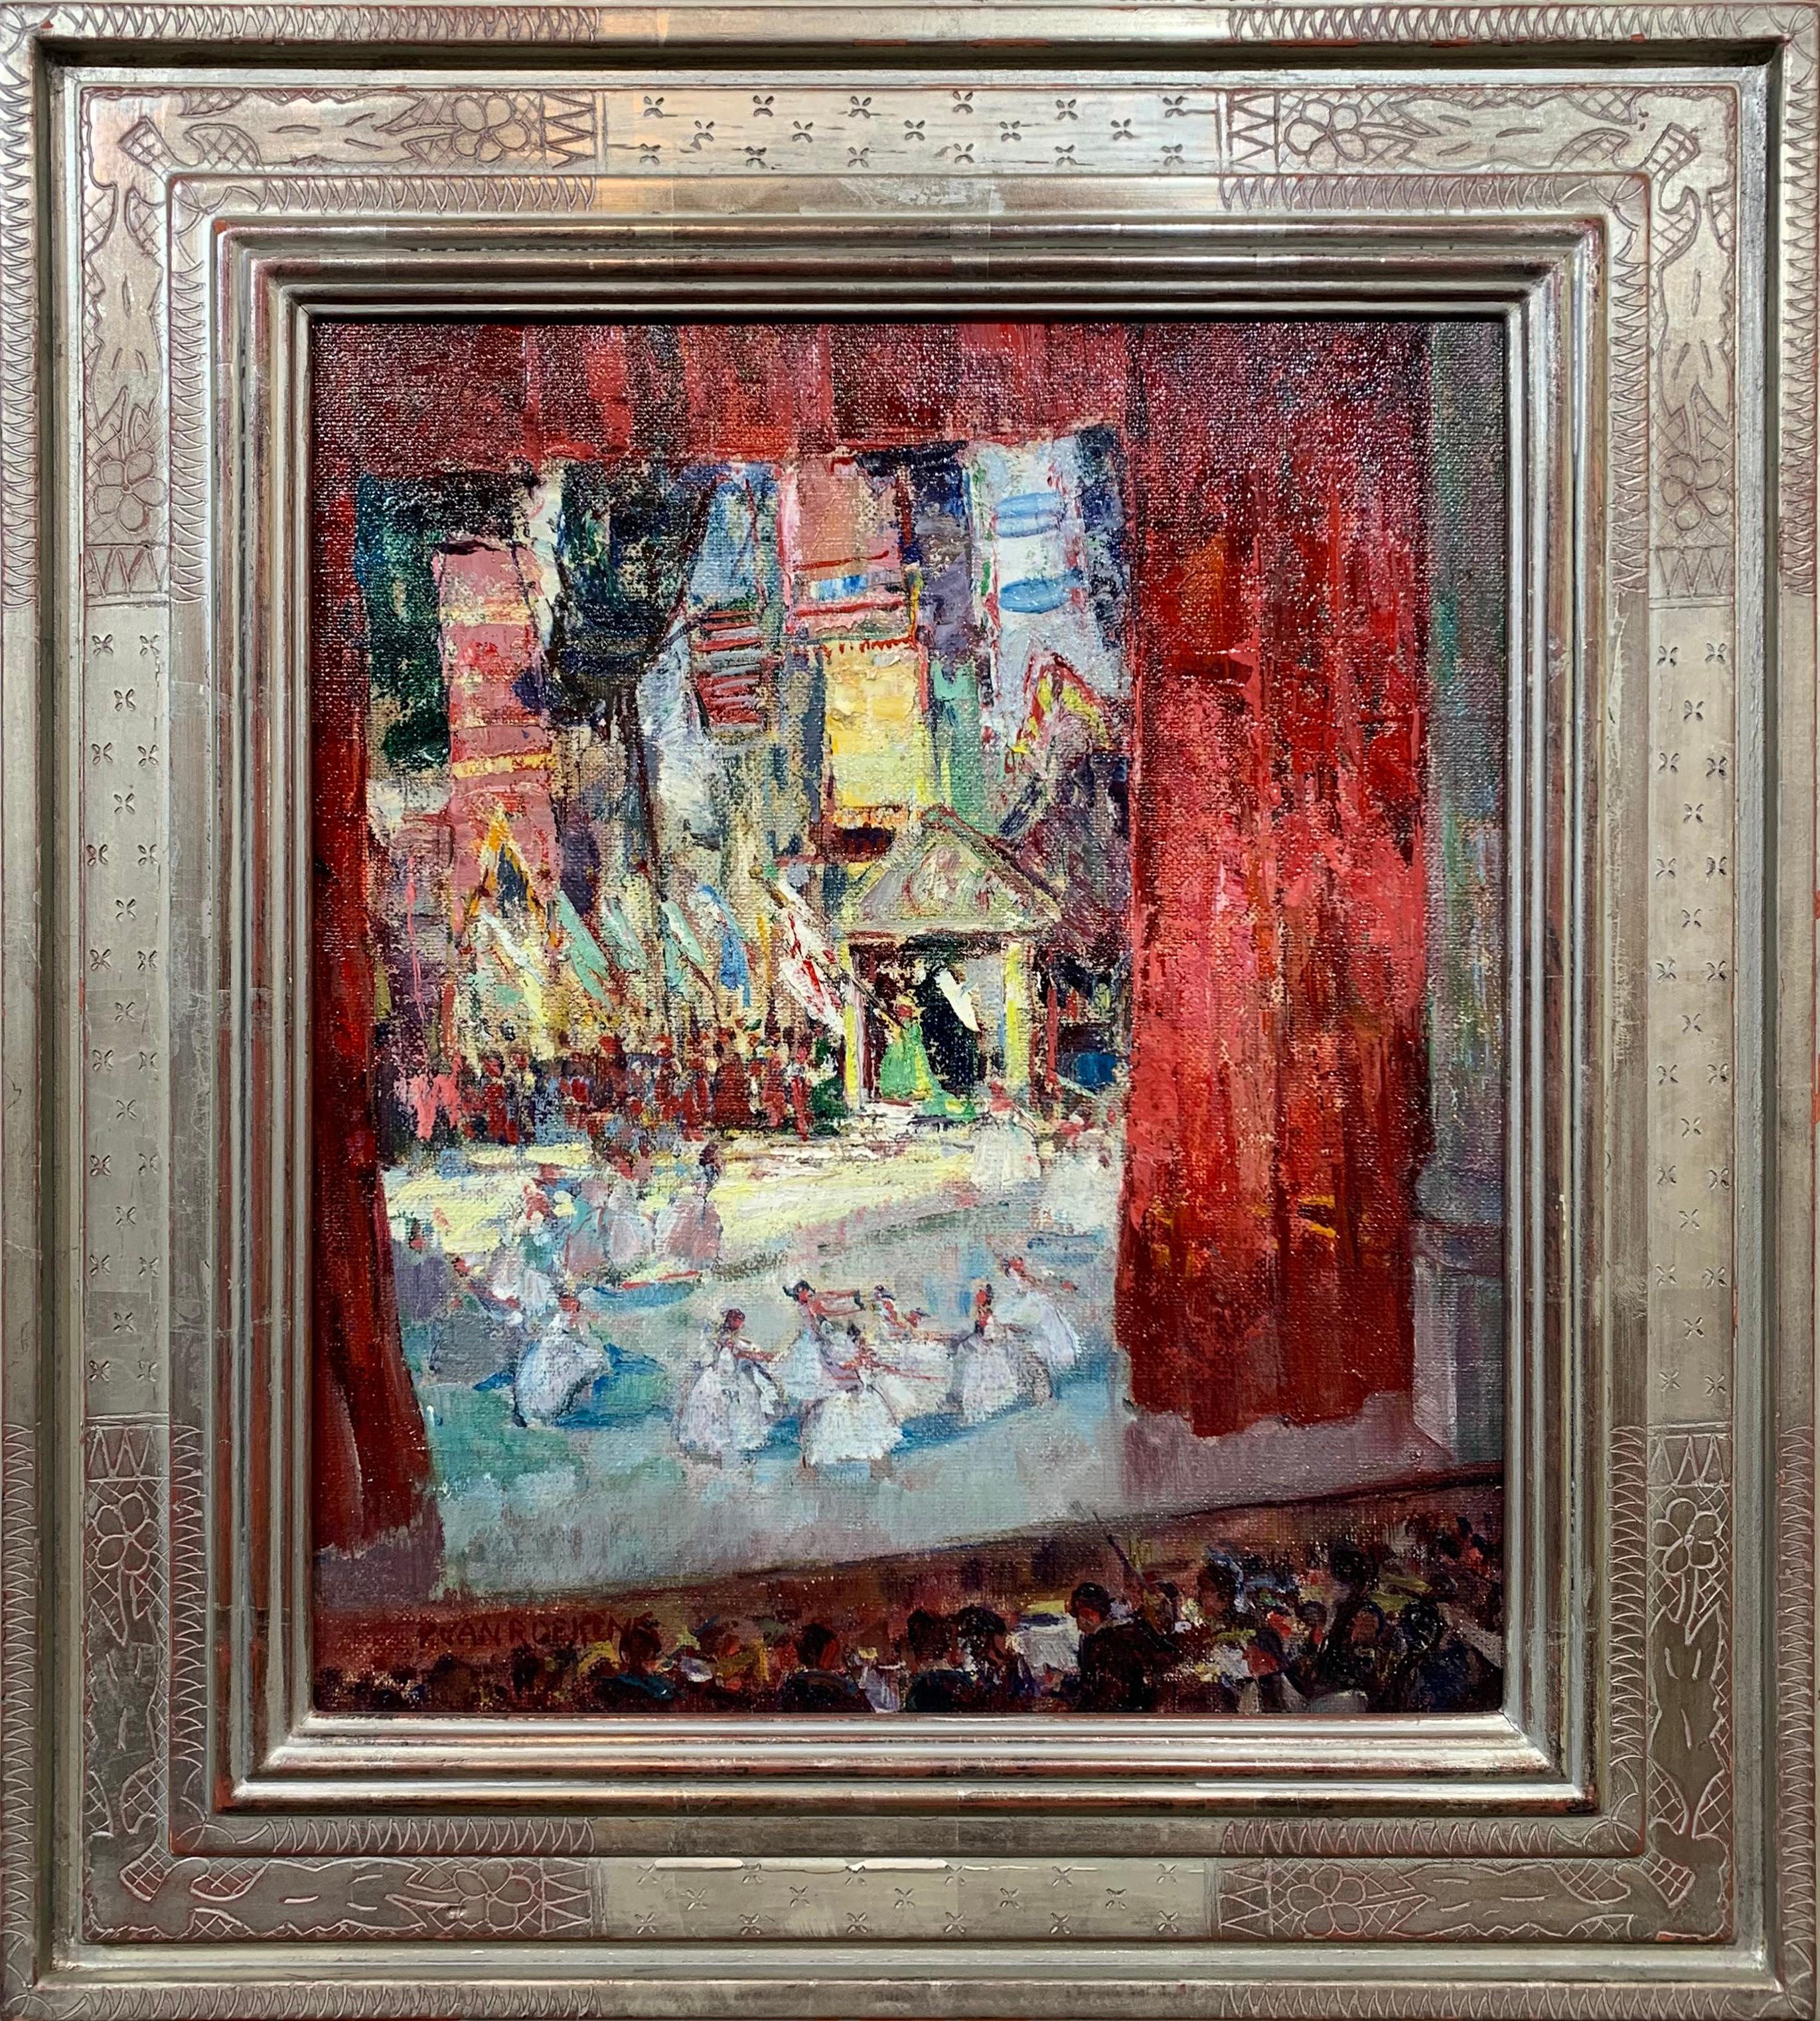 Red Curtains, American Impressionist Ballet and Orchestra Theater Scene - Painting by Paulette Victorine J. Van Roekens